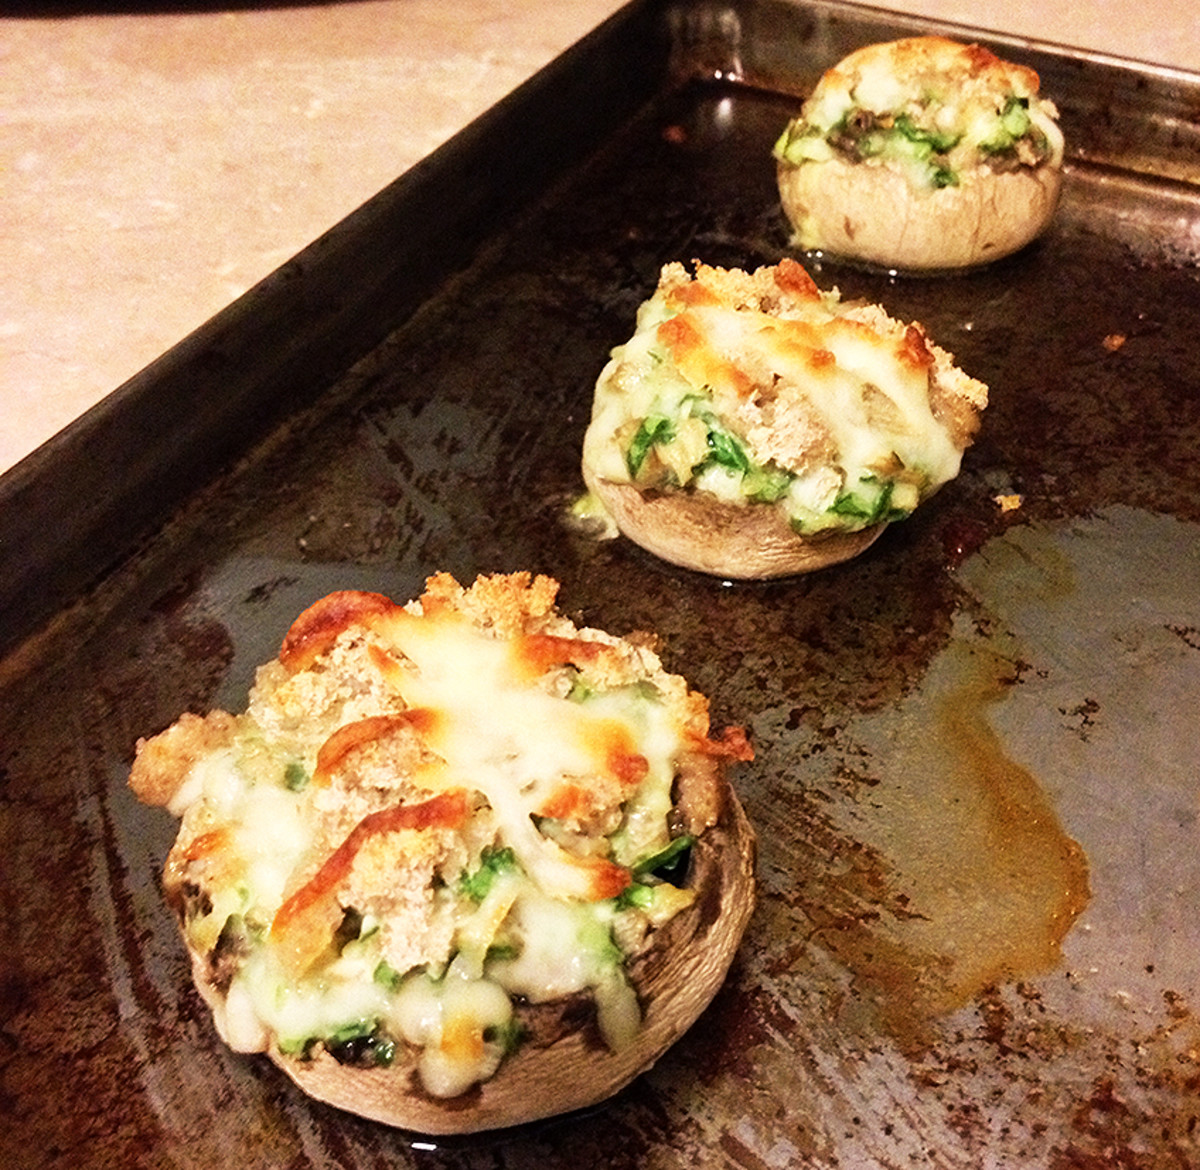 Stuffed mushroom caps fresh out of the oven and still bubbly hot!